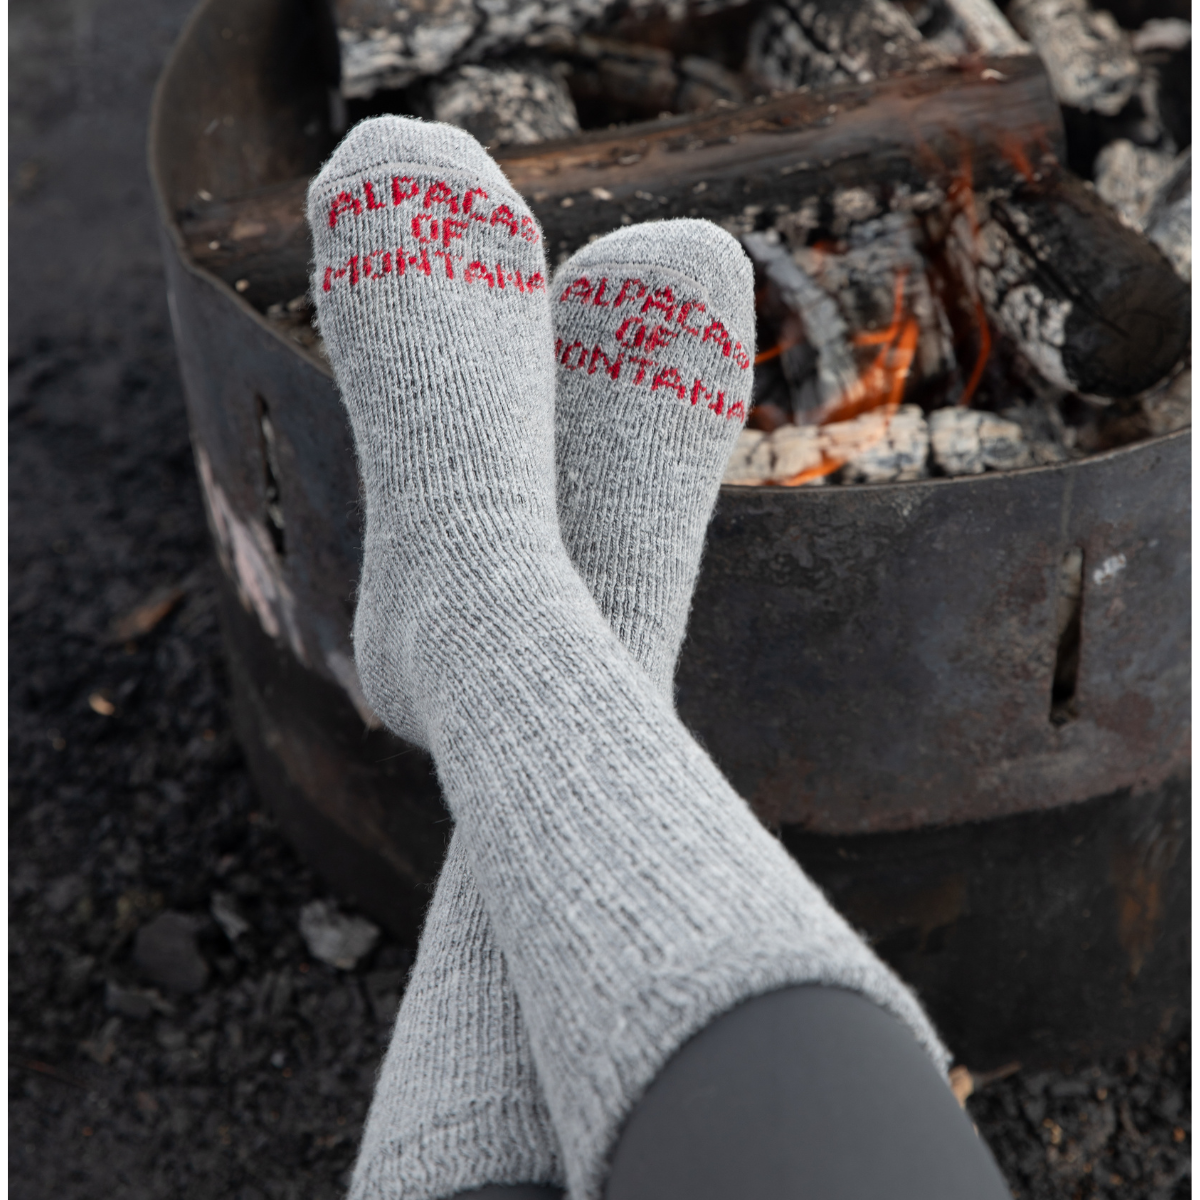 A pair of feet resting up against an outdoor camping fireplace wearing a pair of silver gray Alpacas of Montana cozy comfortable soft warm thermal winter freezing temperatures moisture wicking maximum warmth arctic boot socks for hiking, snowshoeing, hunting, skiing, ice fishing, outdoors.